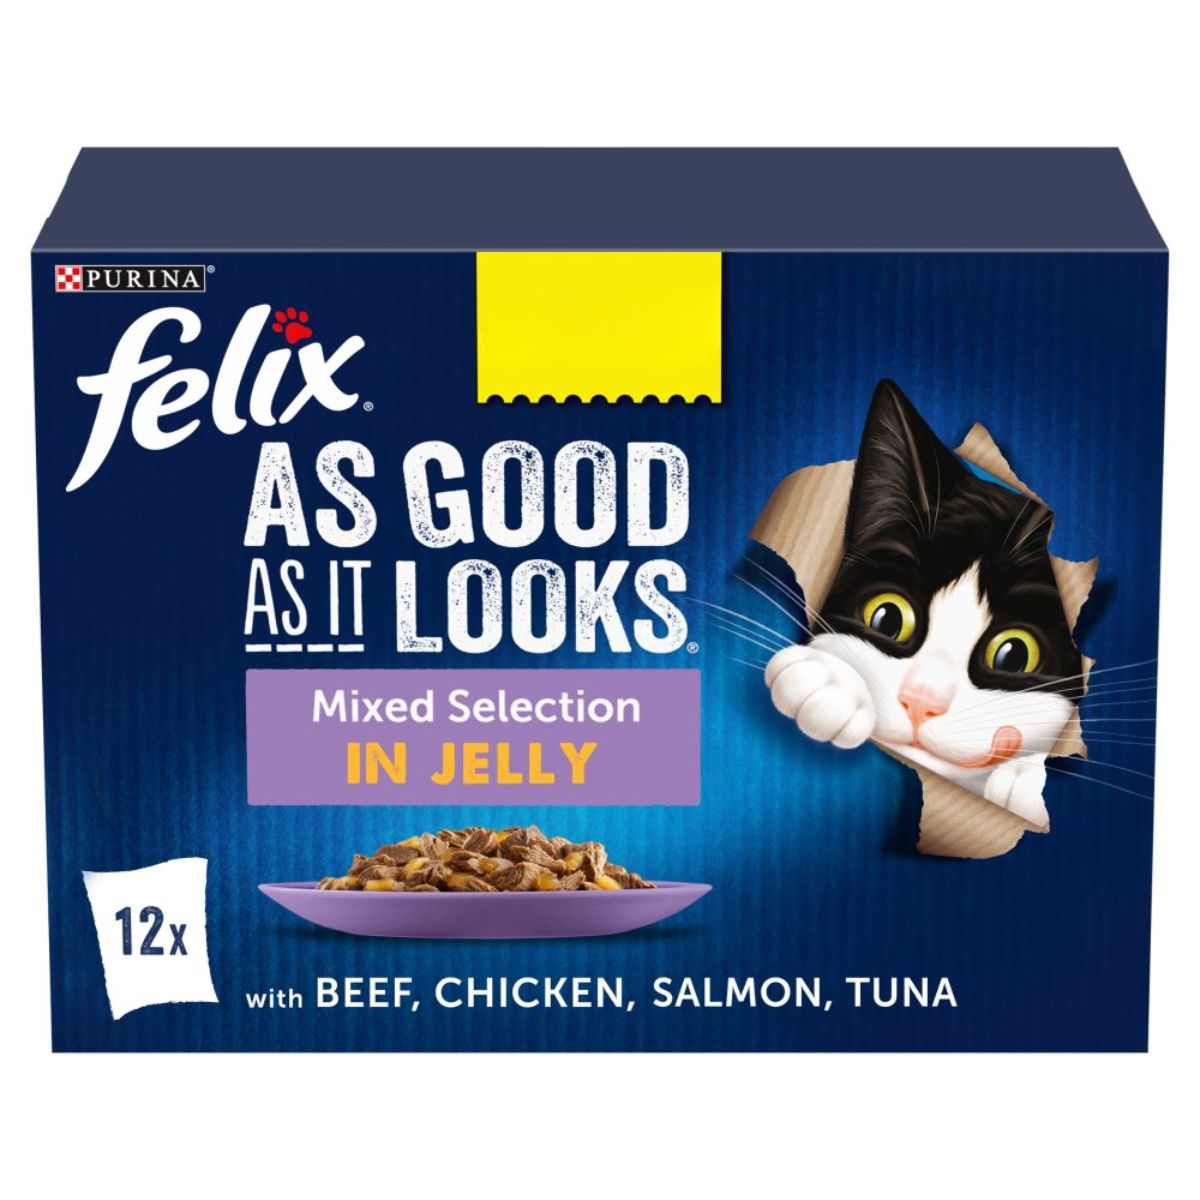 Felix - As Good As It Looks Mixed Selection in Jelly - 12 x 100g as it looks in jelly cat food.